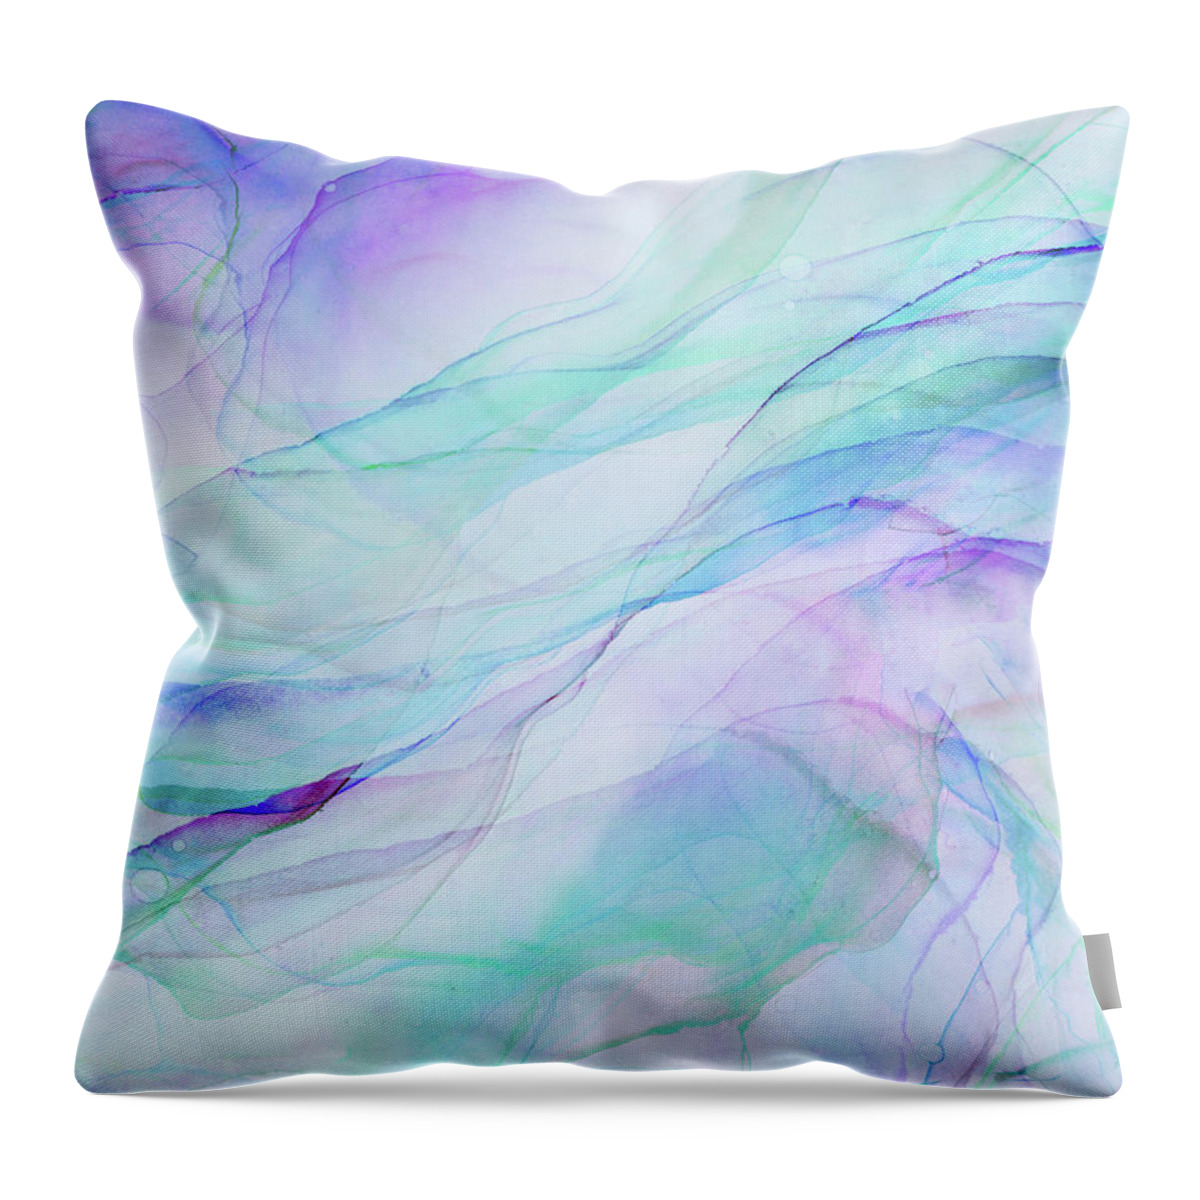 Pastel Throw Pillow featuring the painting Soft Flowing Pastel Colors Abstract Ink Painting by Olga Shvartsur